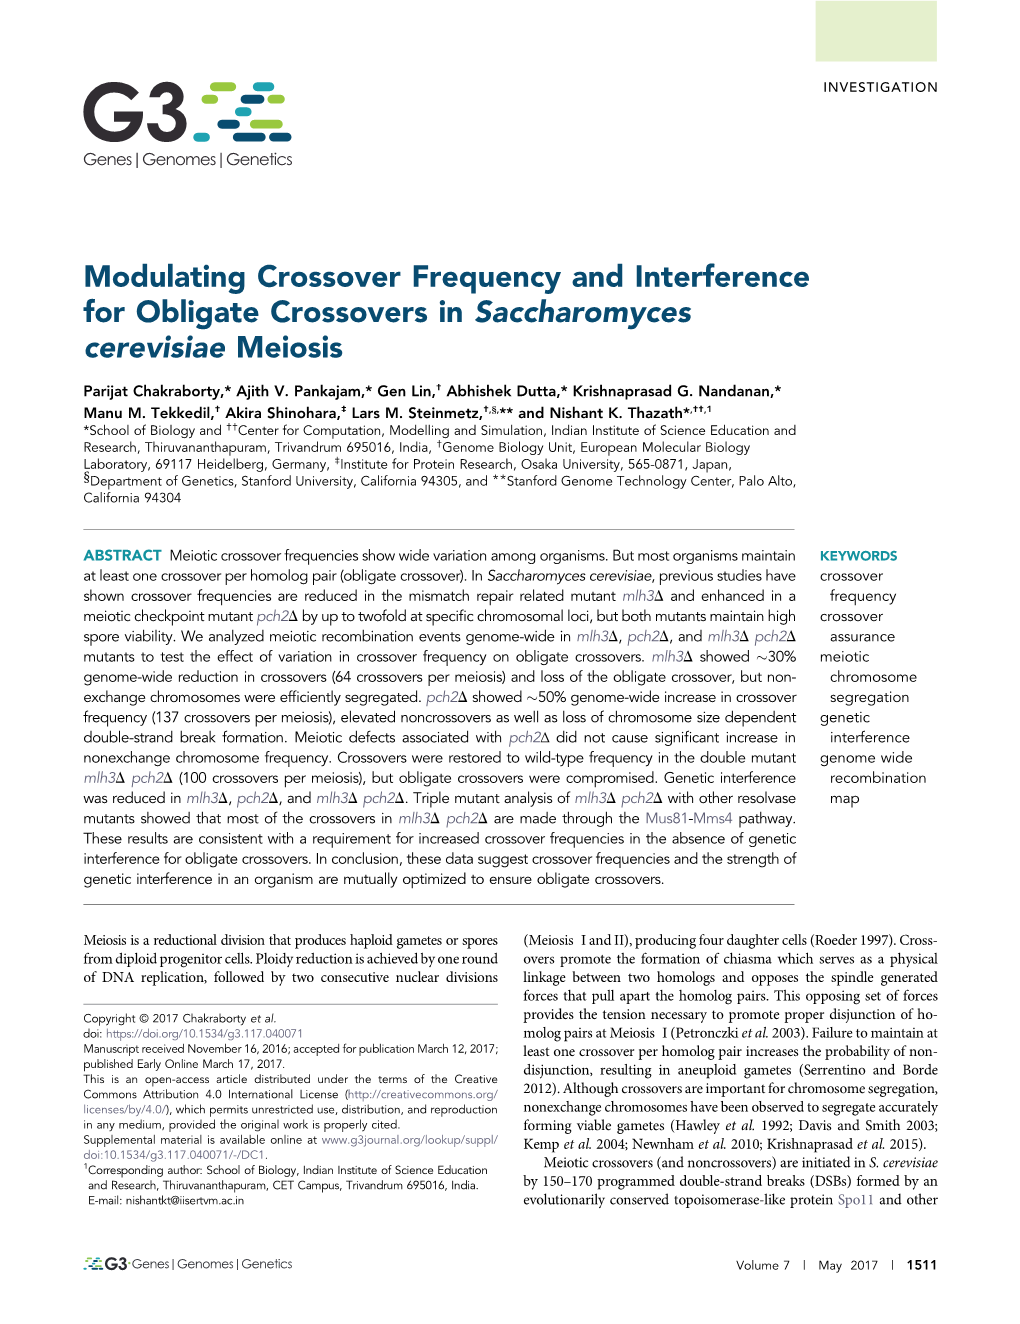 Modulating Crossover Frequency and Interference for Obligate Crossovers in Saccharomyces Cerevisiae Meiosis